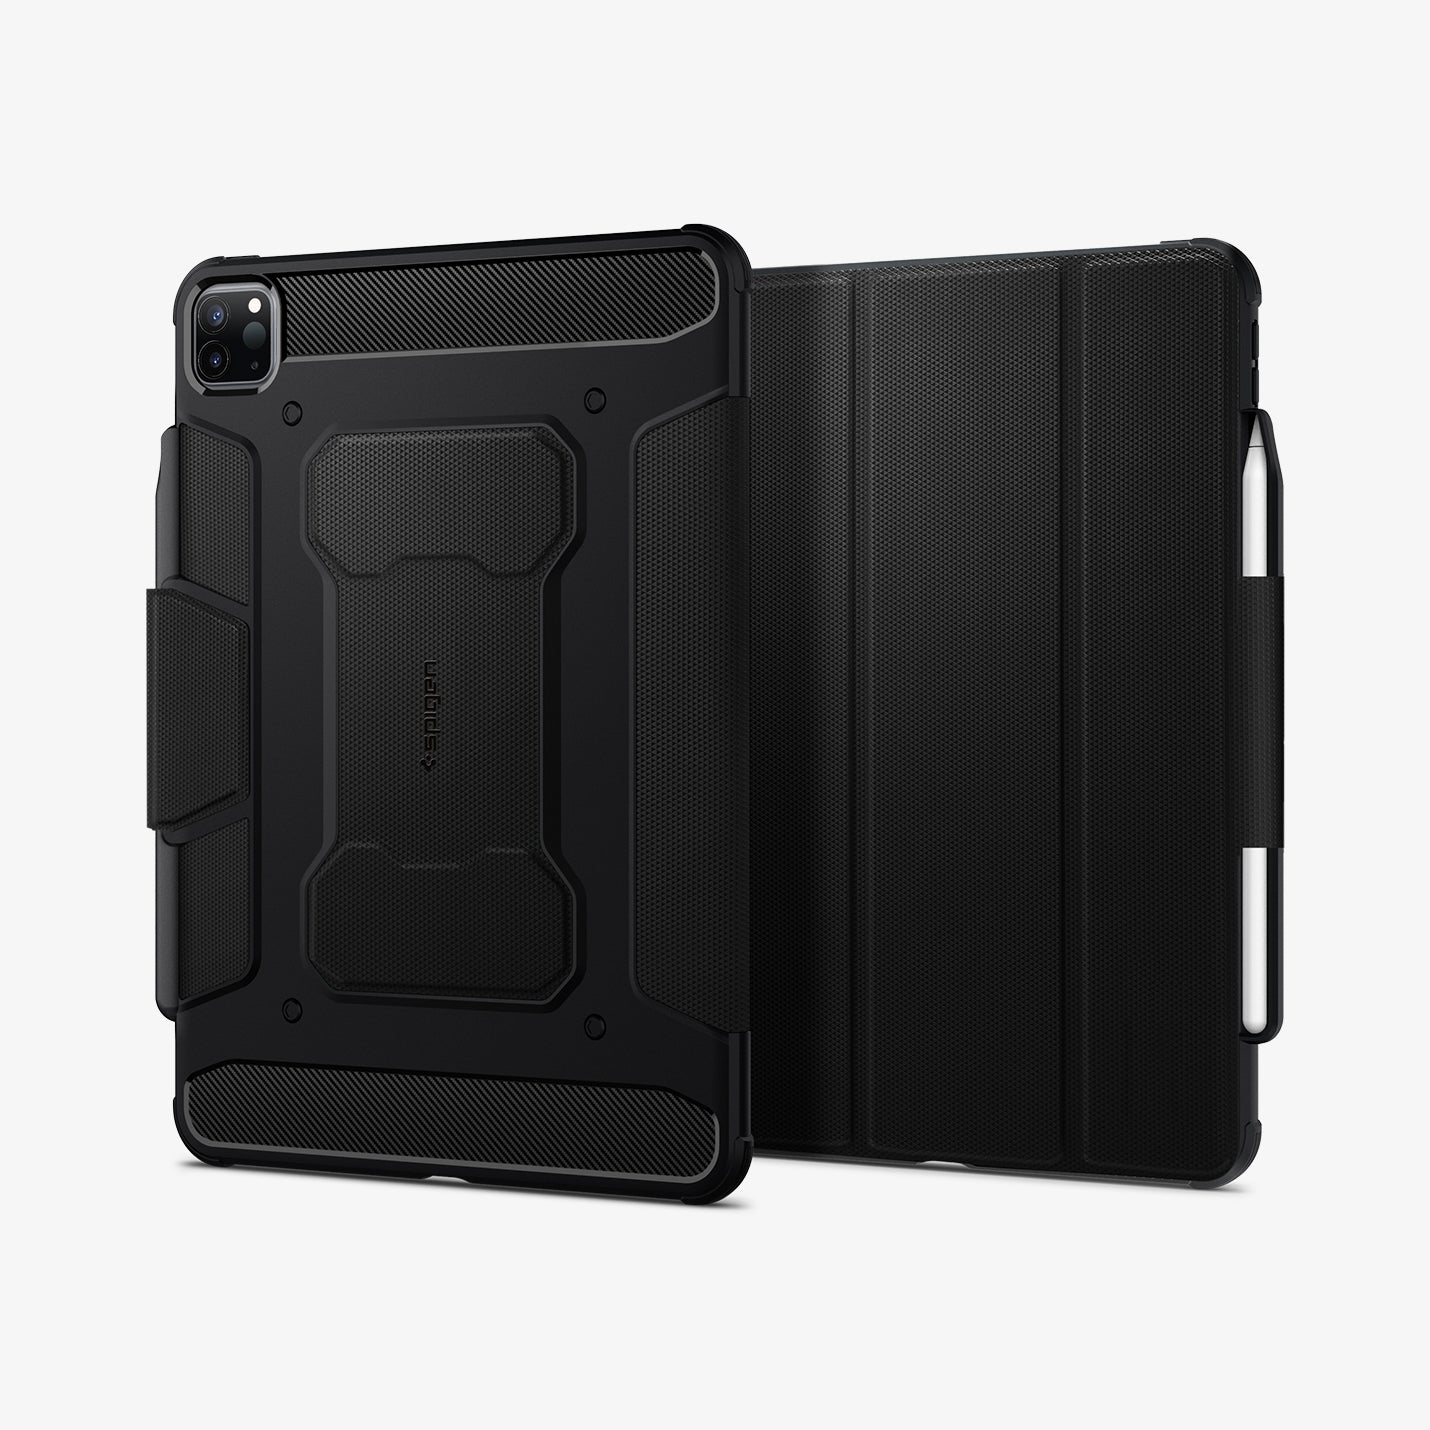 ACS02889 - iPad Pro 12.9-inch Case Rugged Armor Pro in Black showing the back and partial front with s-pen attached